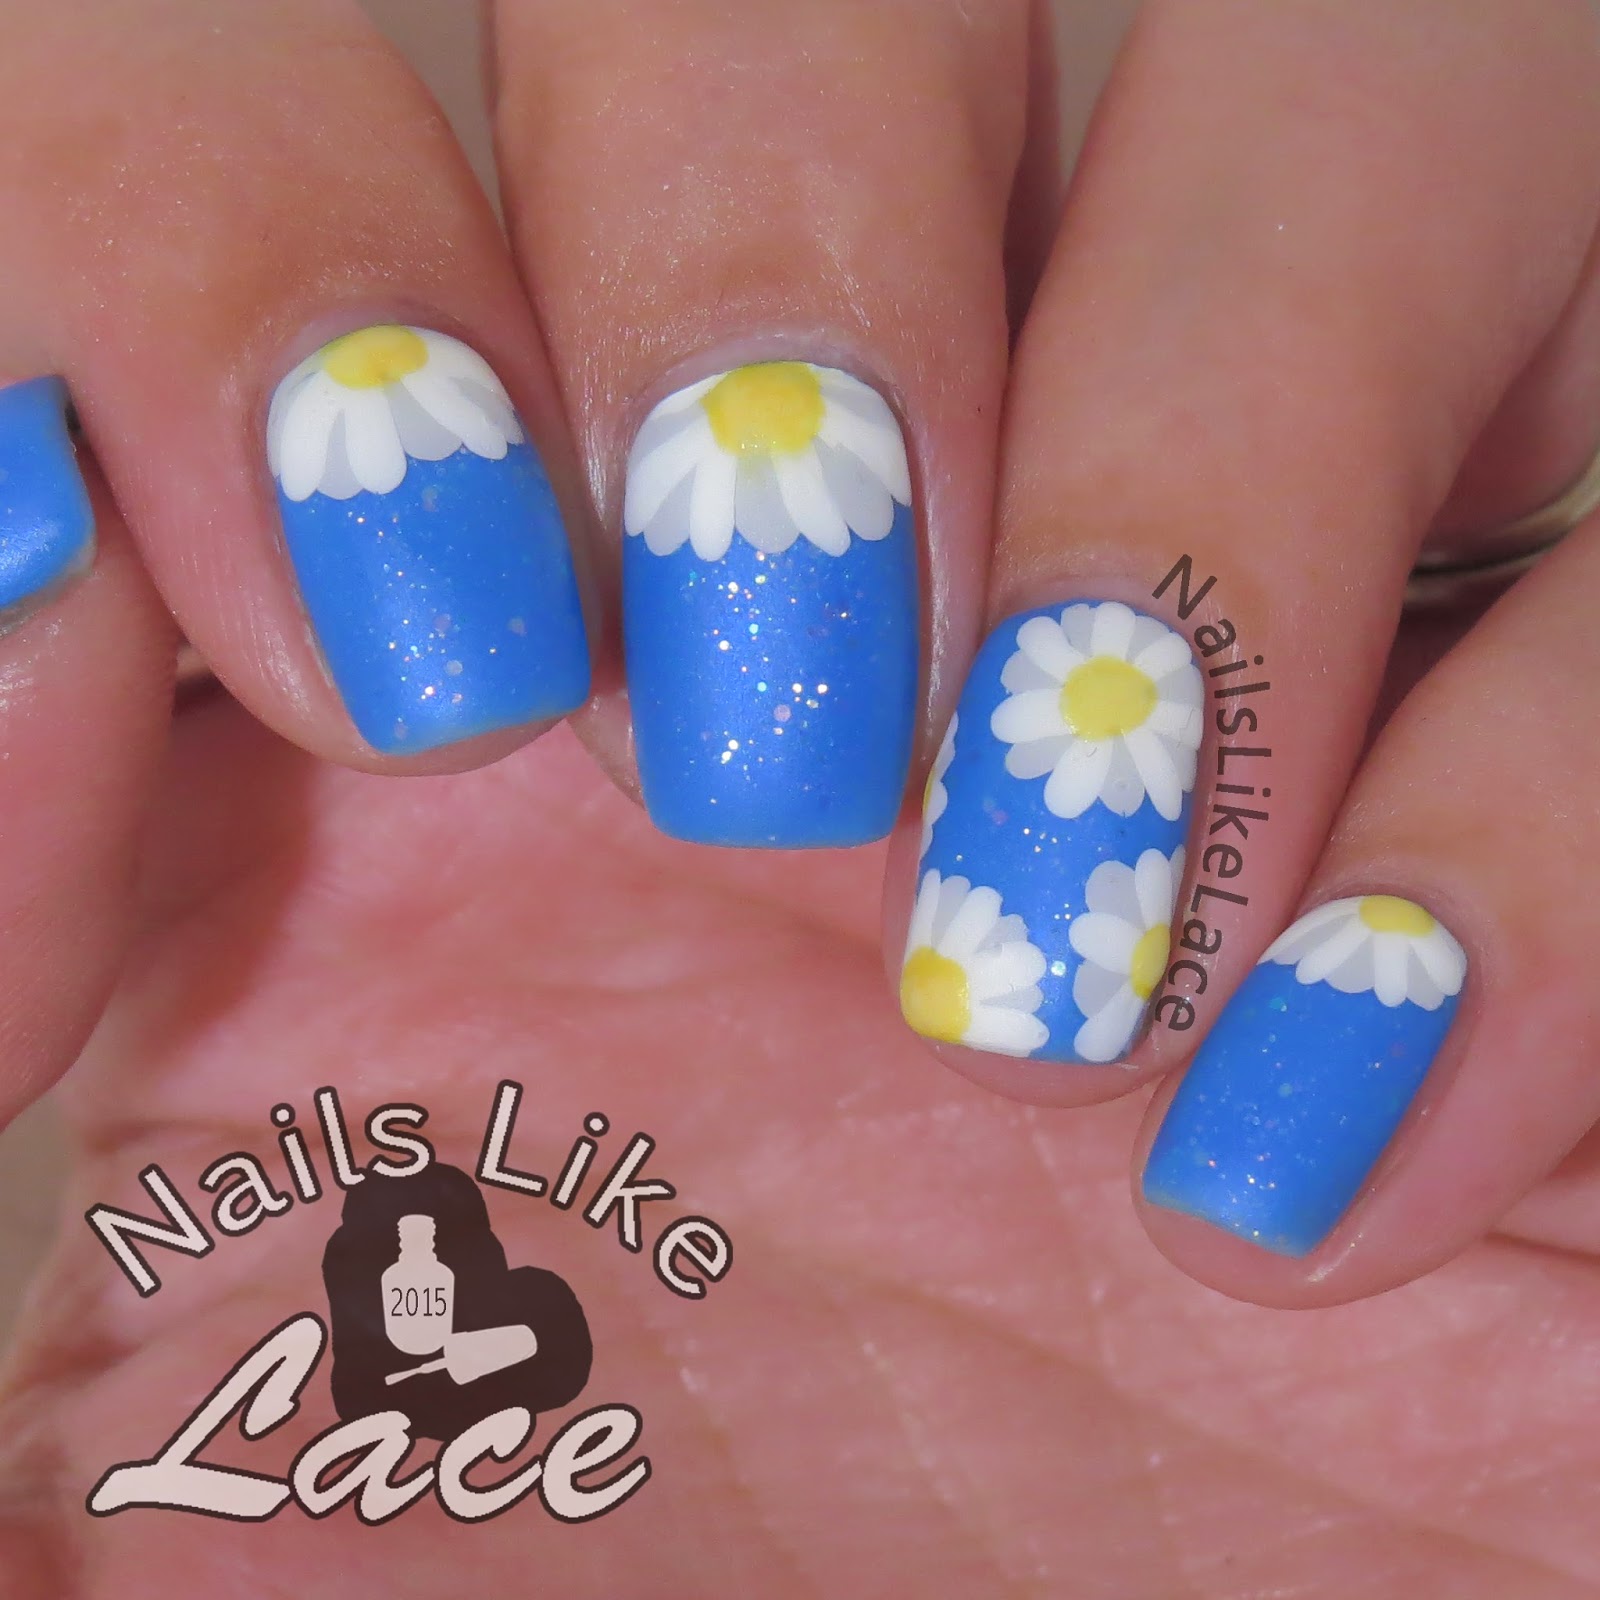 NailsLikeLace: Mommy's Mani Monday: Floral - Half Moon Daisies